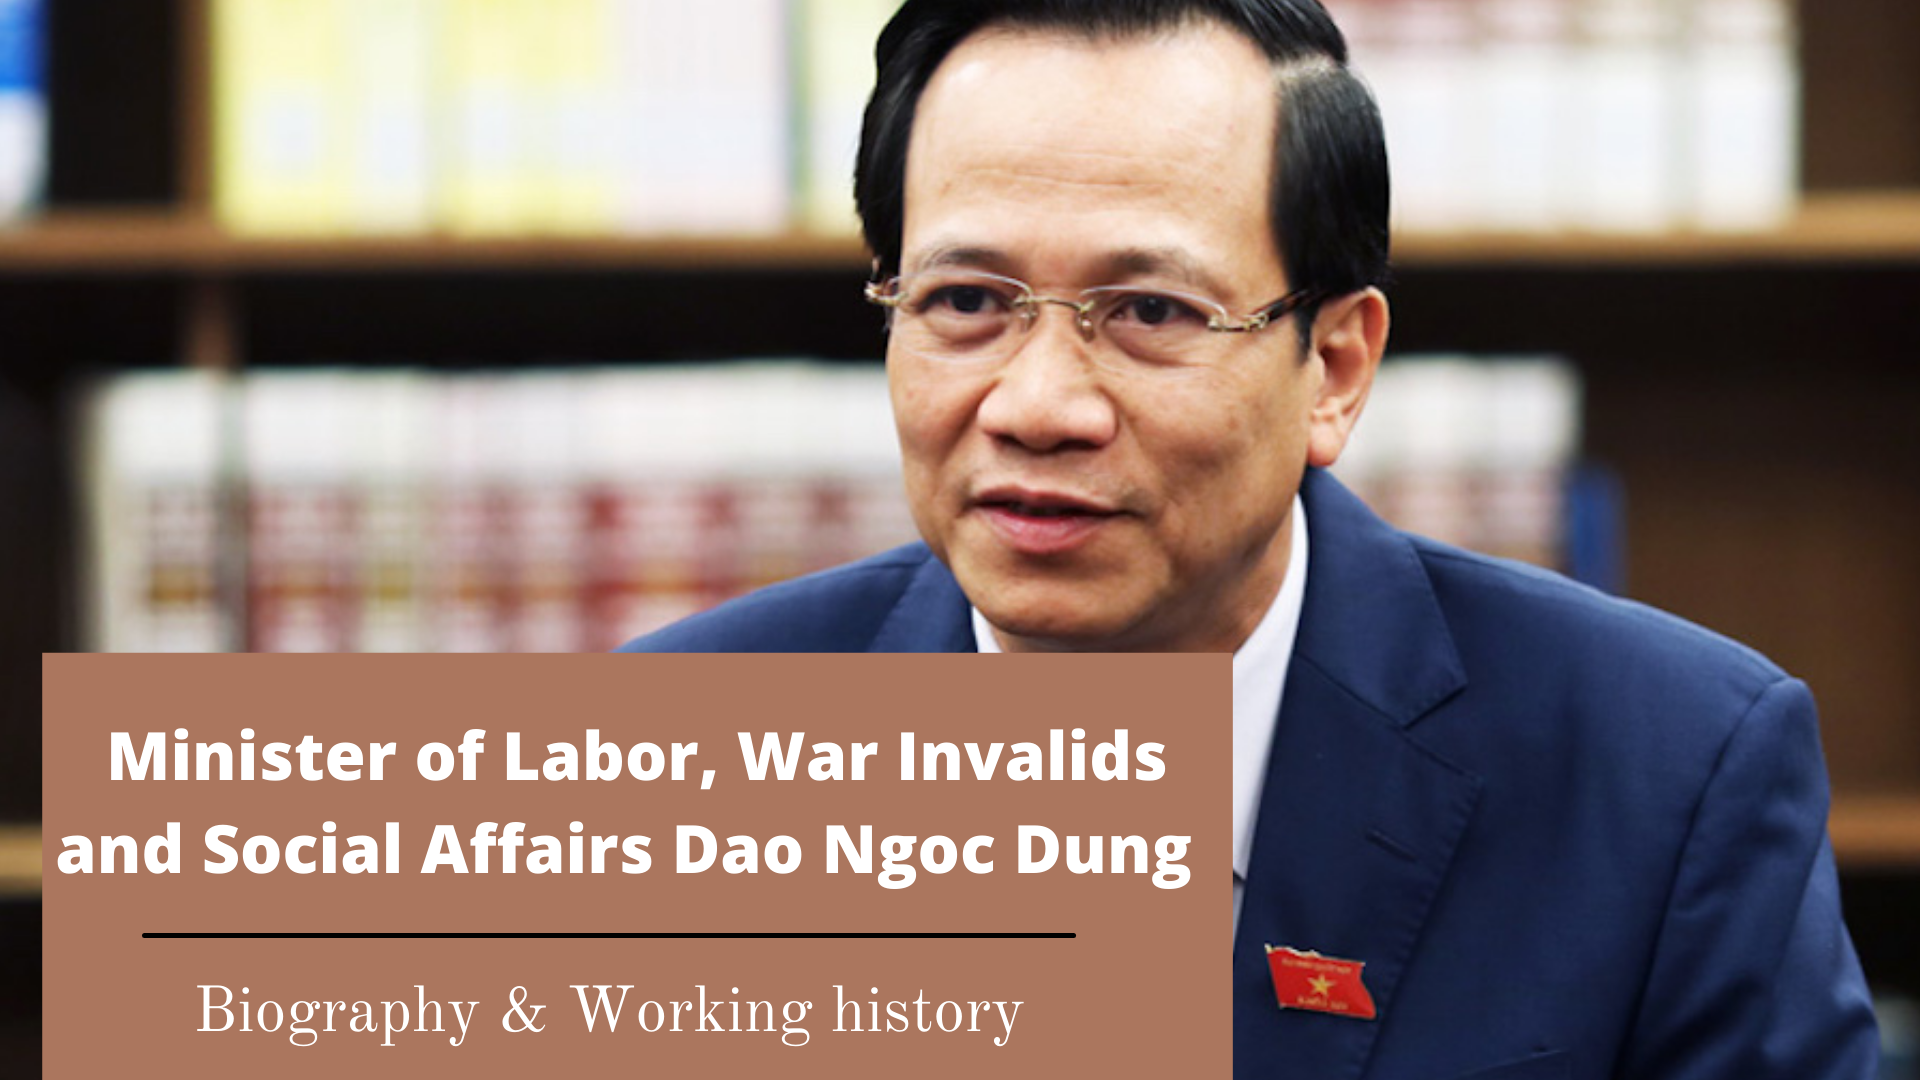 Minister of Labor, War Invalids and Social Affairs Dao Ngoc Dung: Biography and Working History